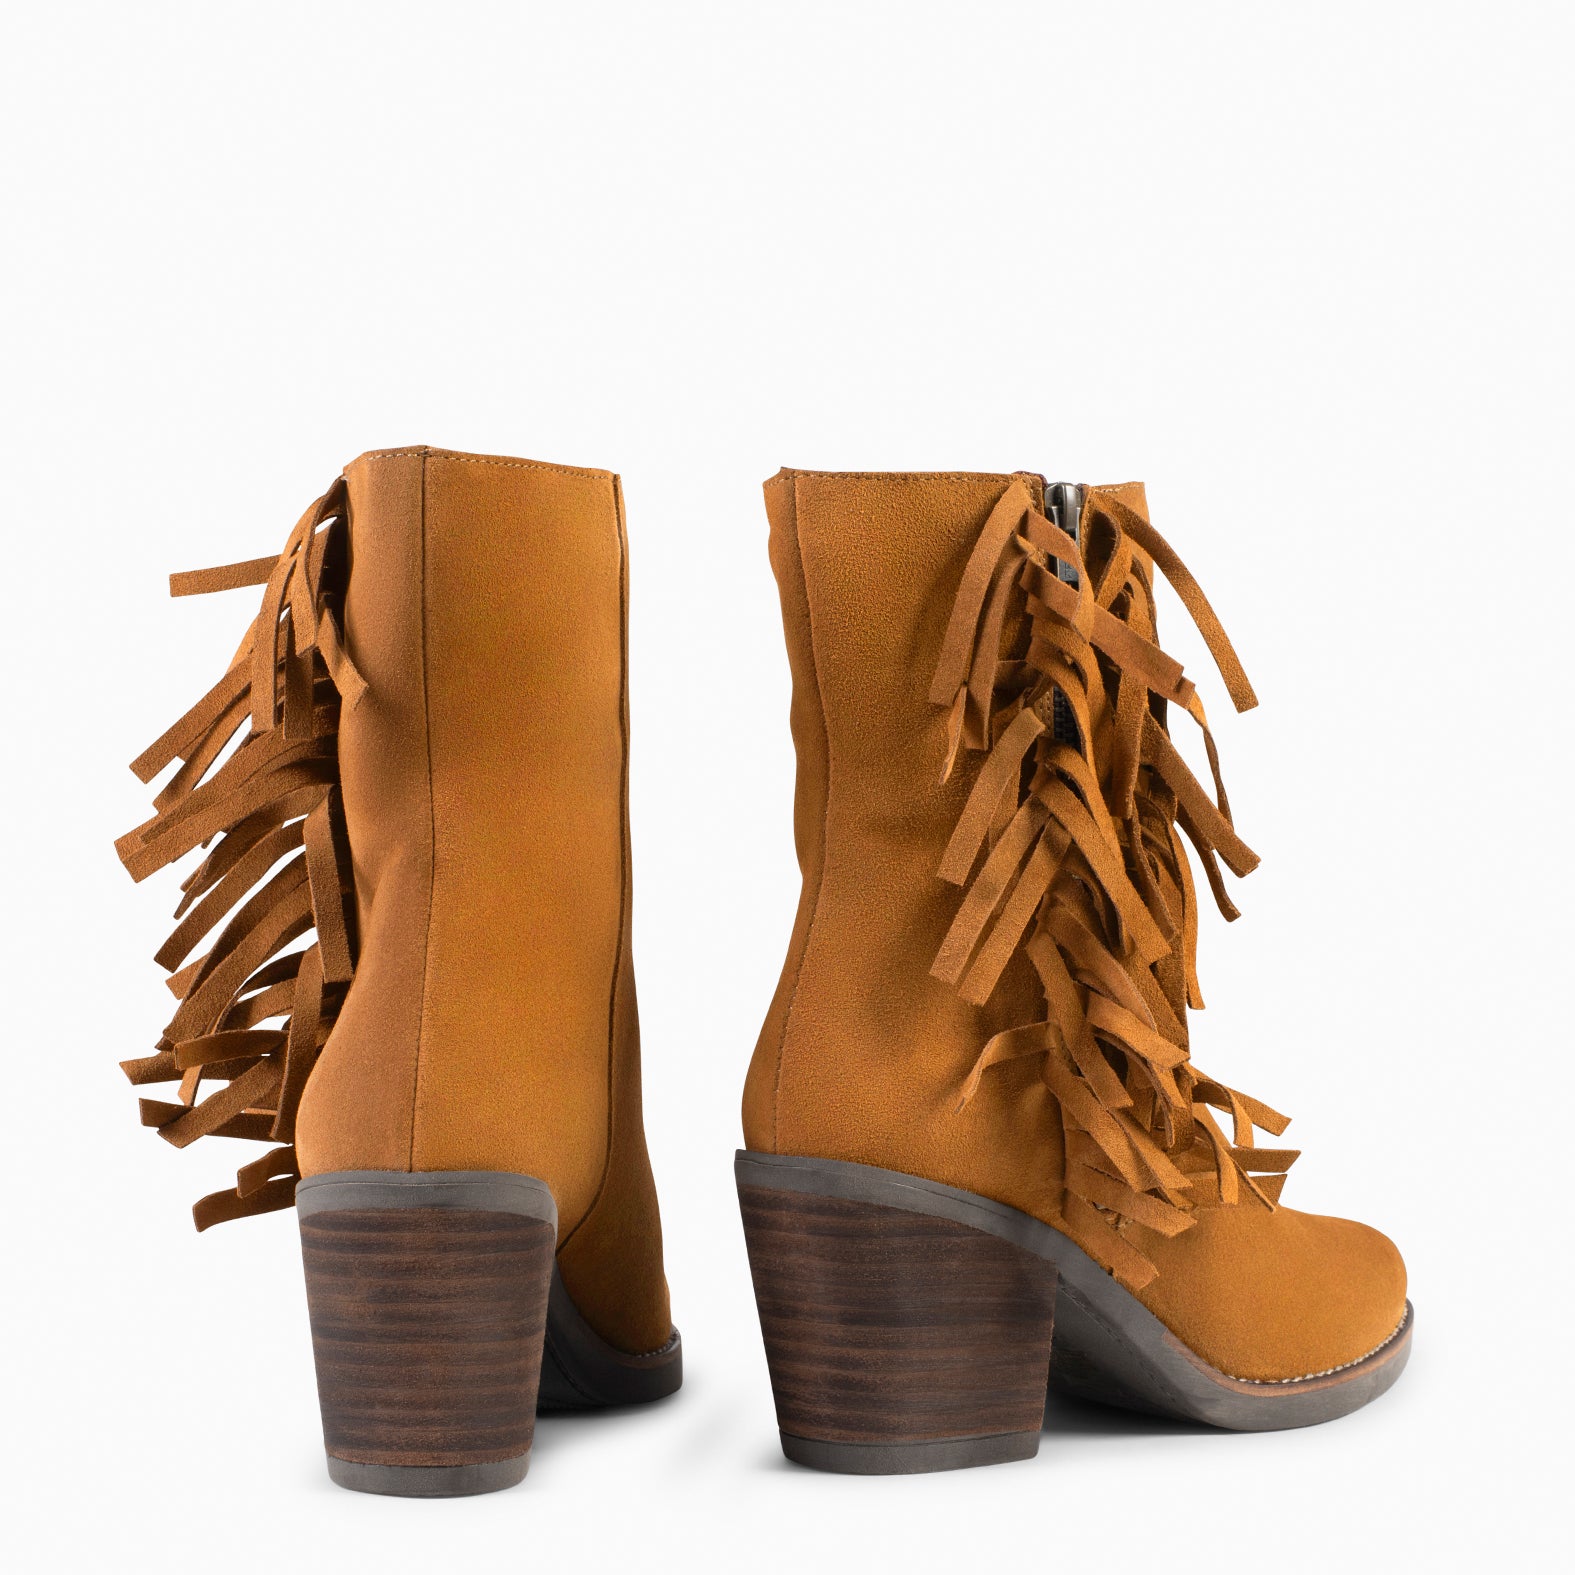 BOHO – CAMEL Women Booties with Fringes 